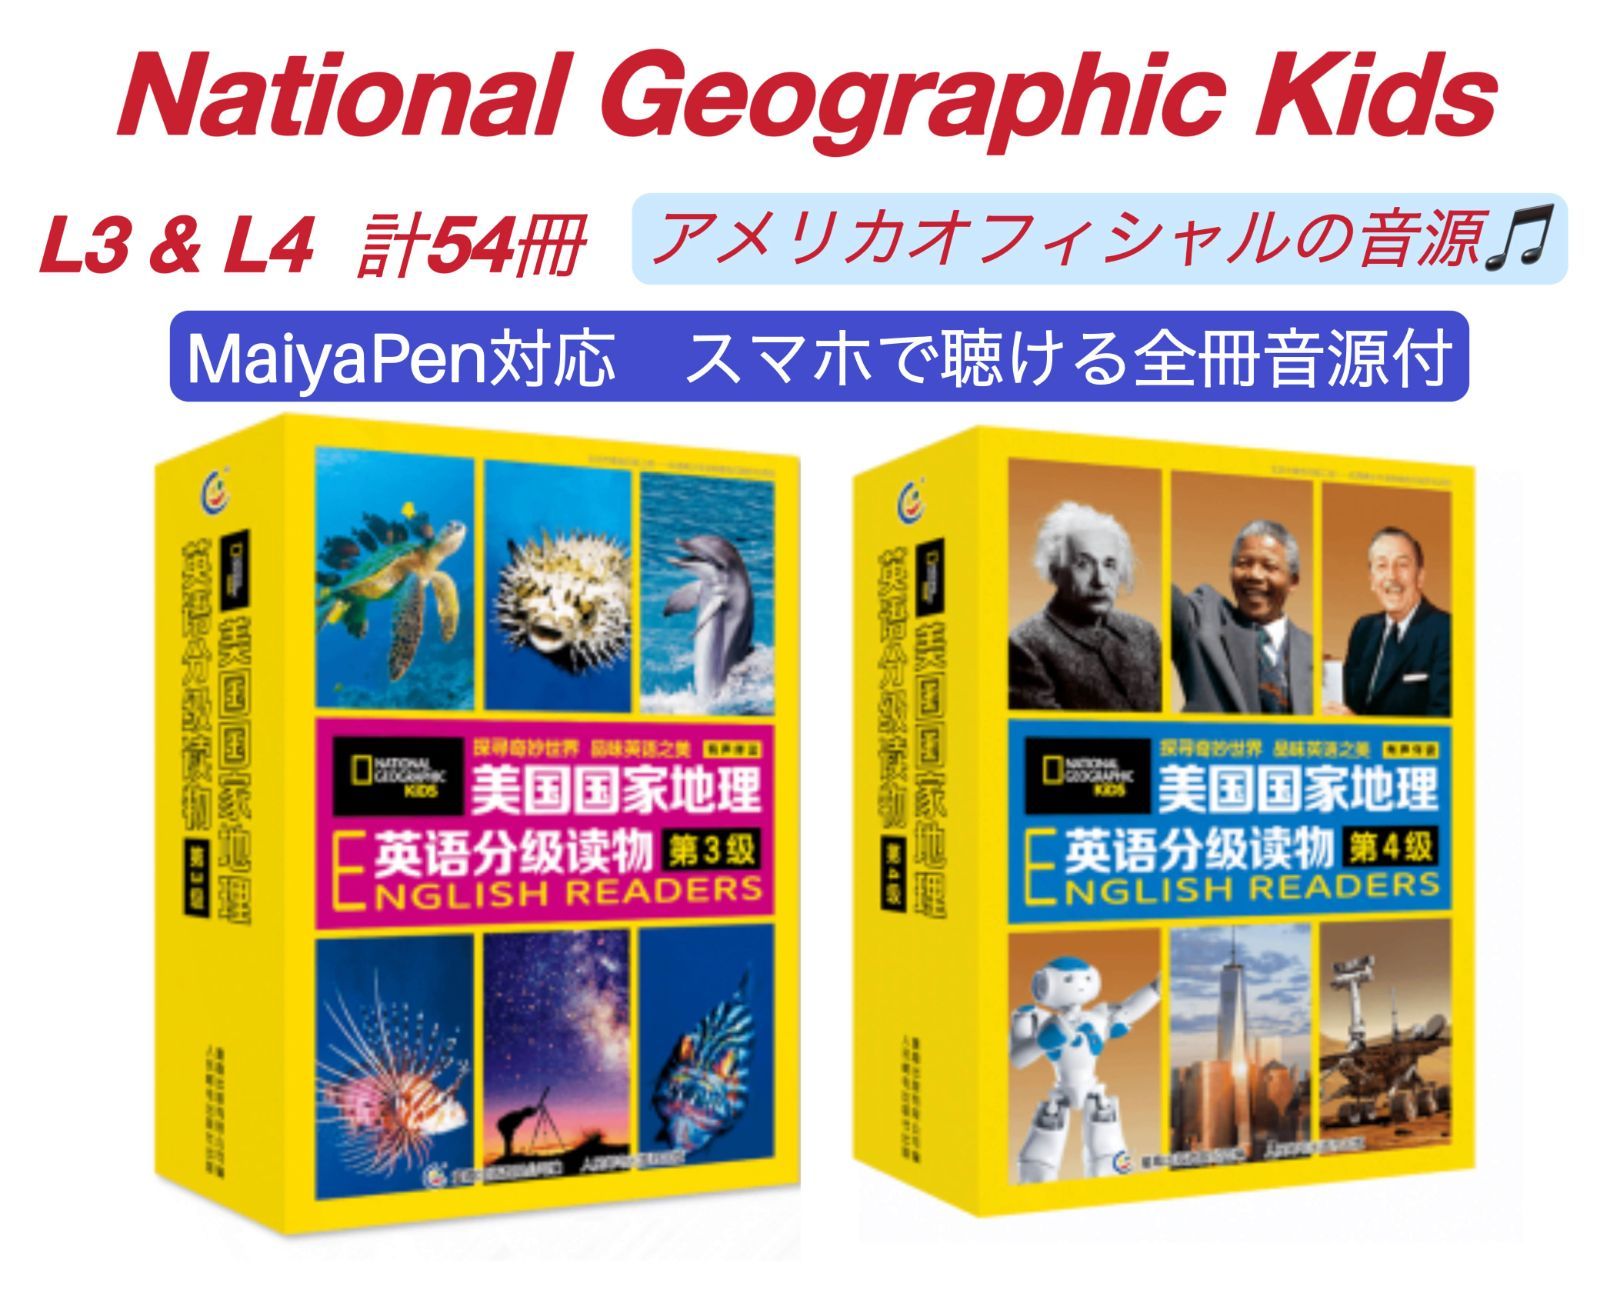 national geographic Kids マイヤペン対応　ナショジオフォニックス